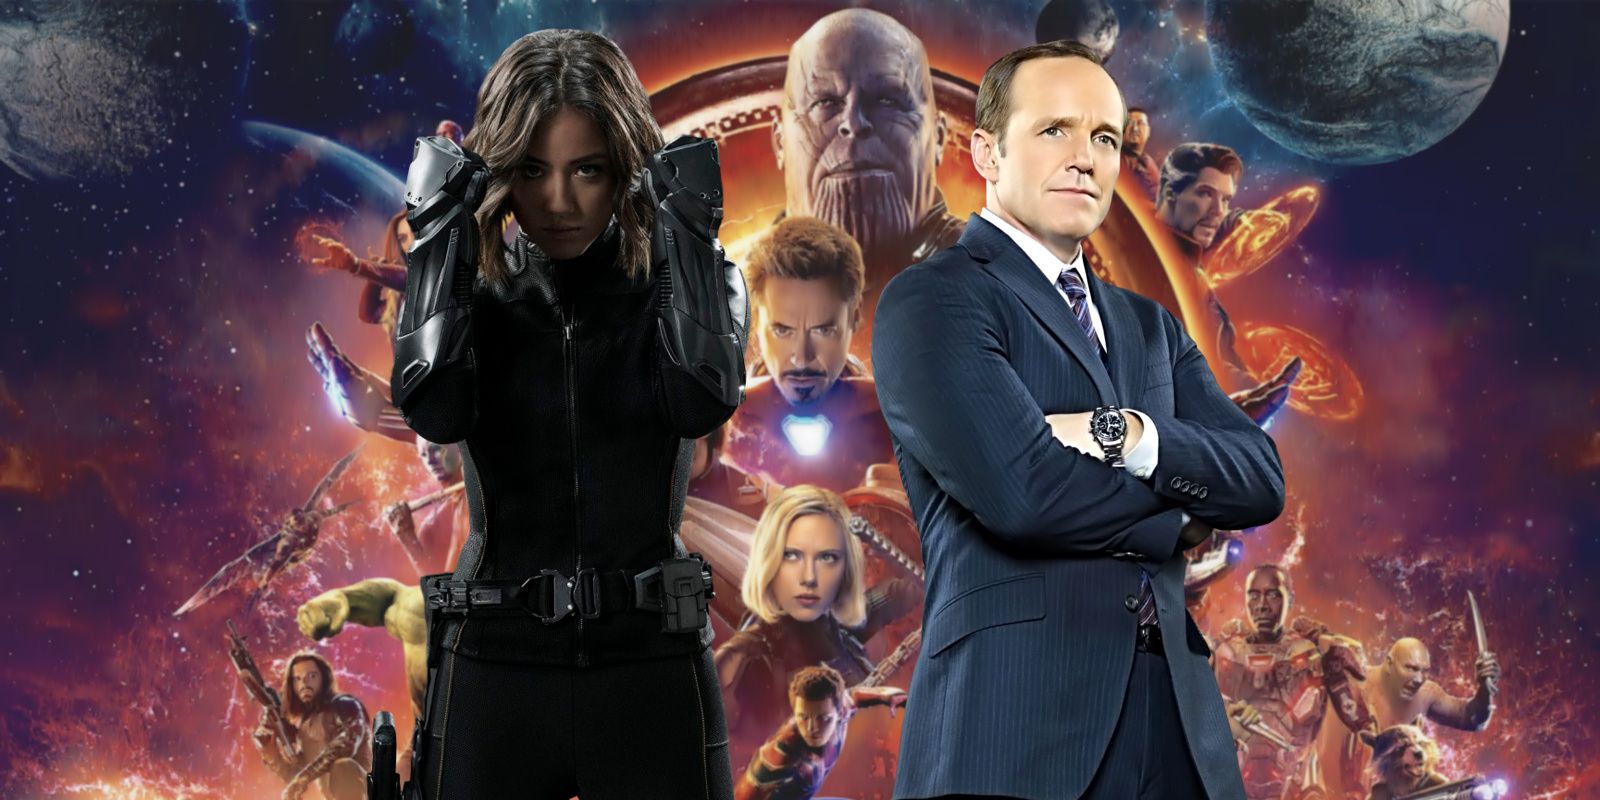 Theory Agents Of SHIELD Is Now In An Alternate MCU Timeline